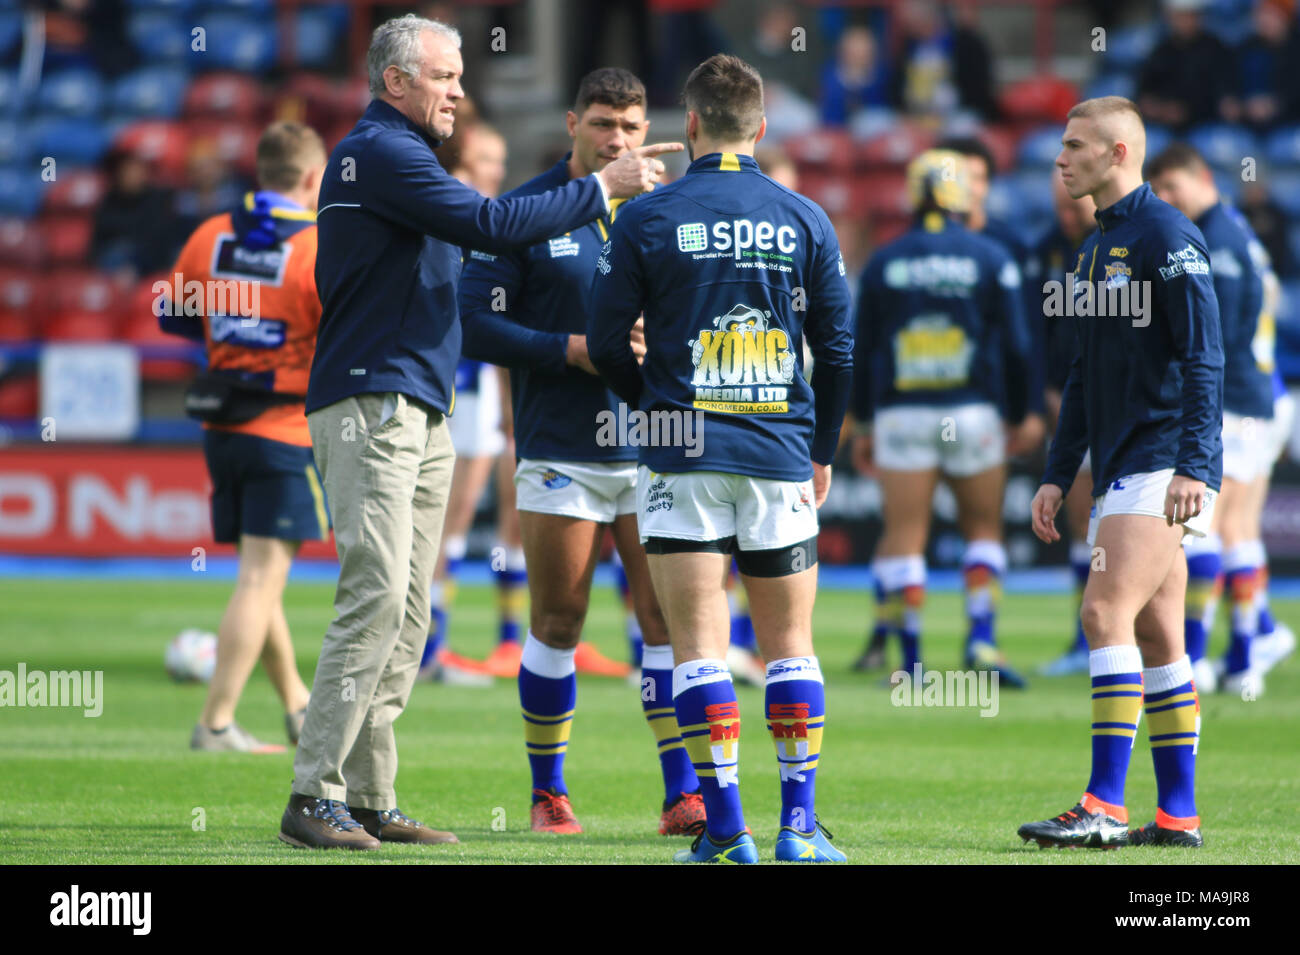 30th March 2018 , John Smiths Stadium, Huddersfield, England; Betfred Super League rugby, Round 8 Huddersfield Giants v Leeds Rhinos; Brian McDermott giving guidance before the kick off against Huddersfield Giants Credit: News Images/Alamy Live News Stock Photo